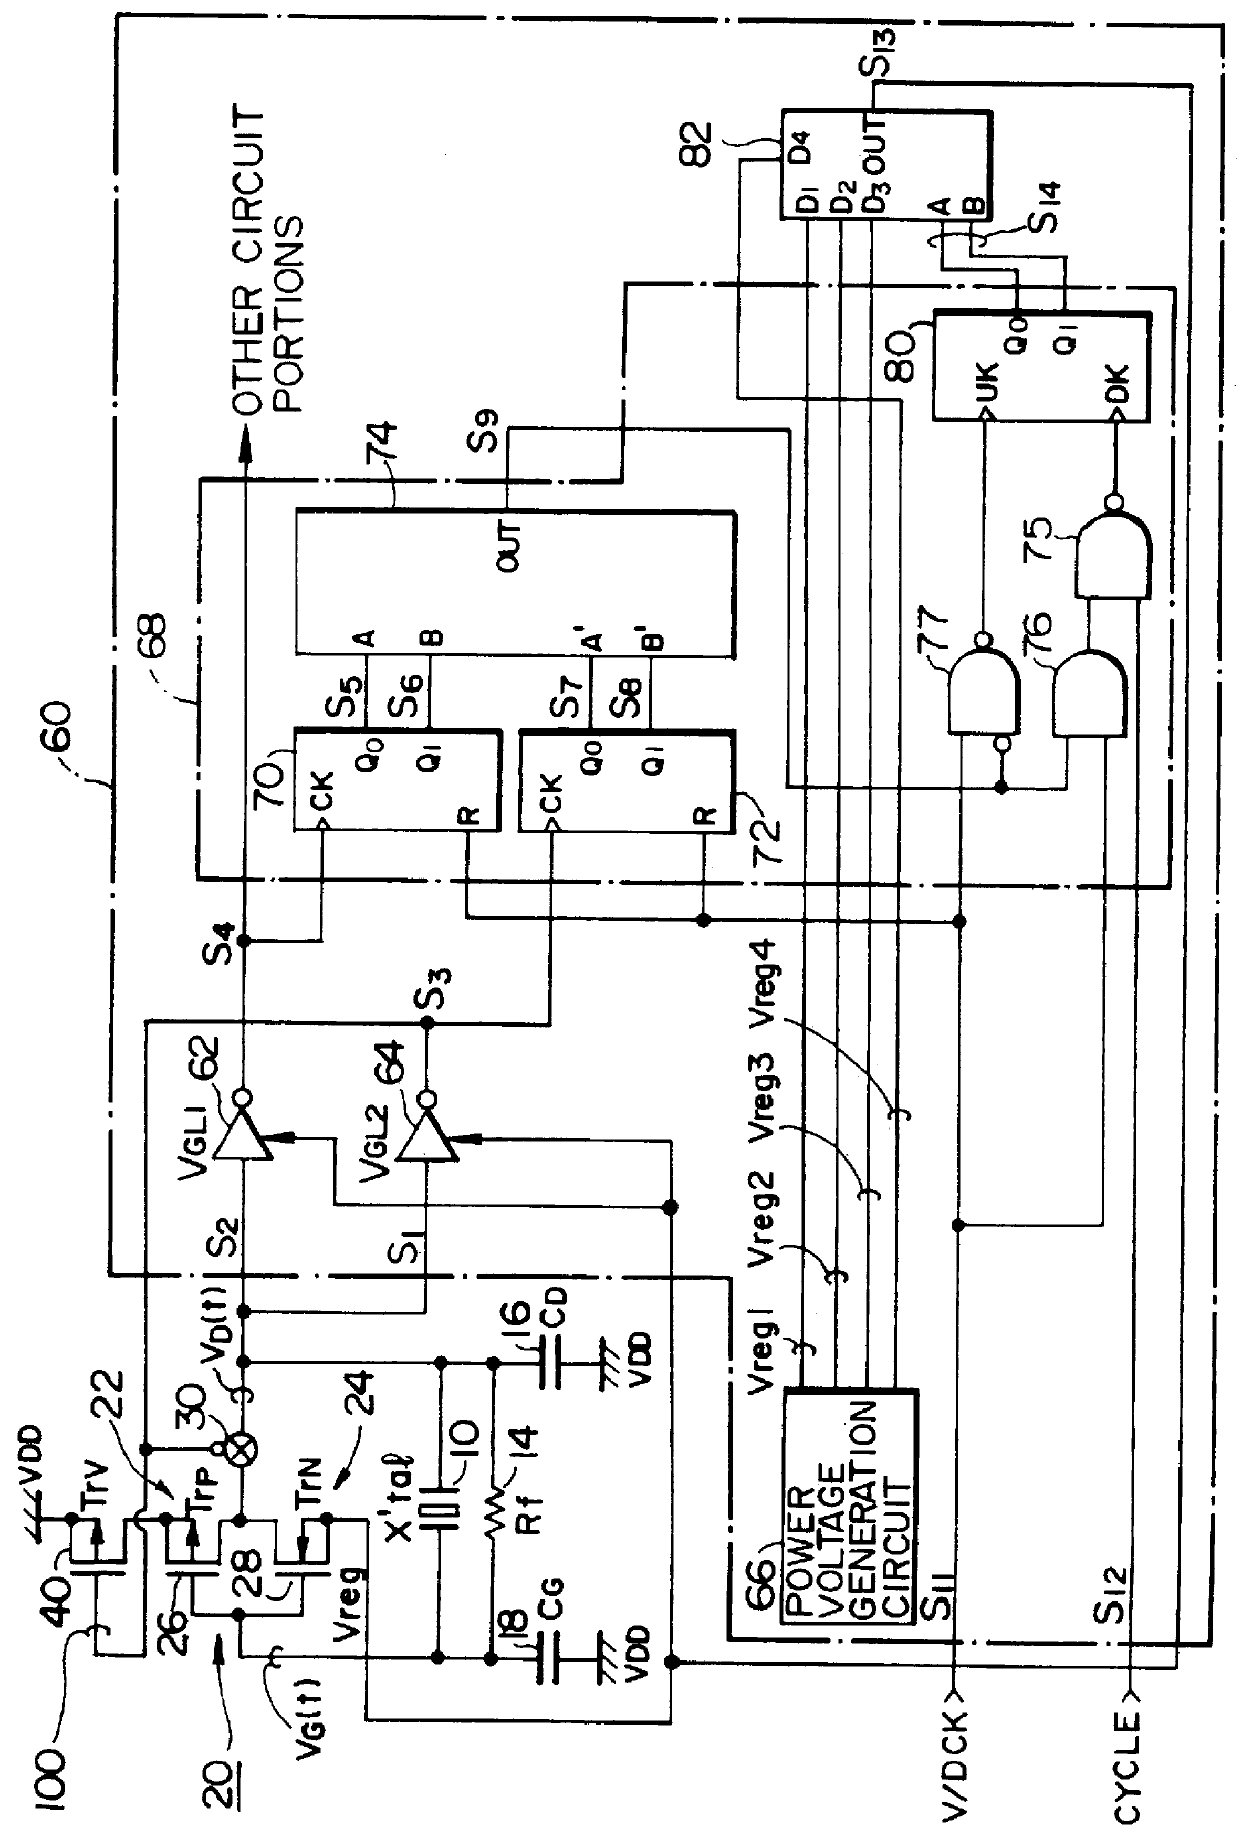 Oscillator circuit supplied with optimal power voltage according to oscillator output